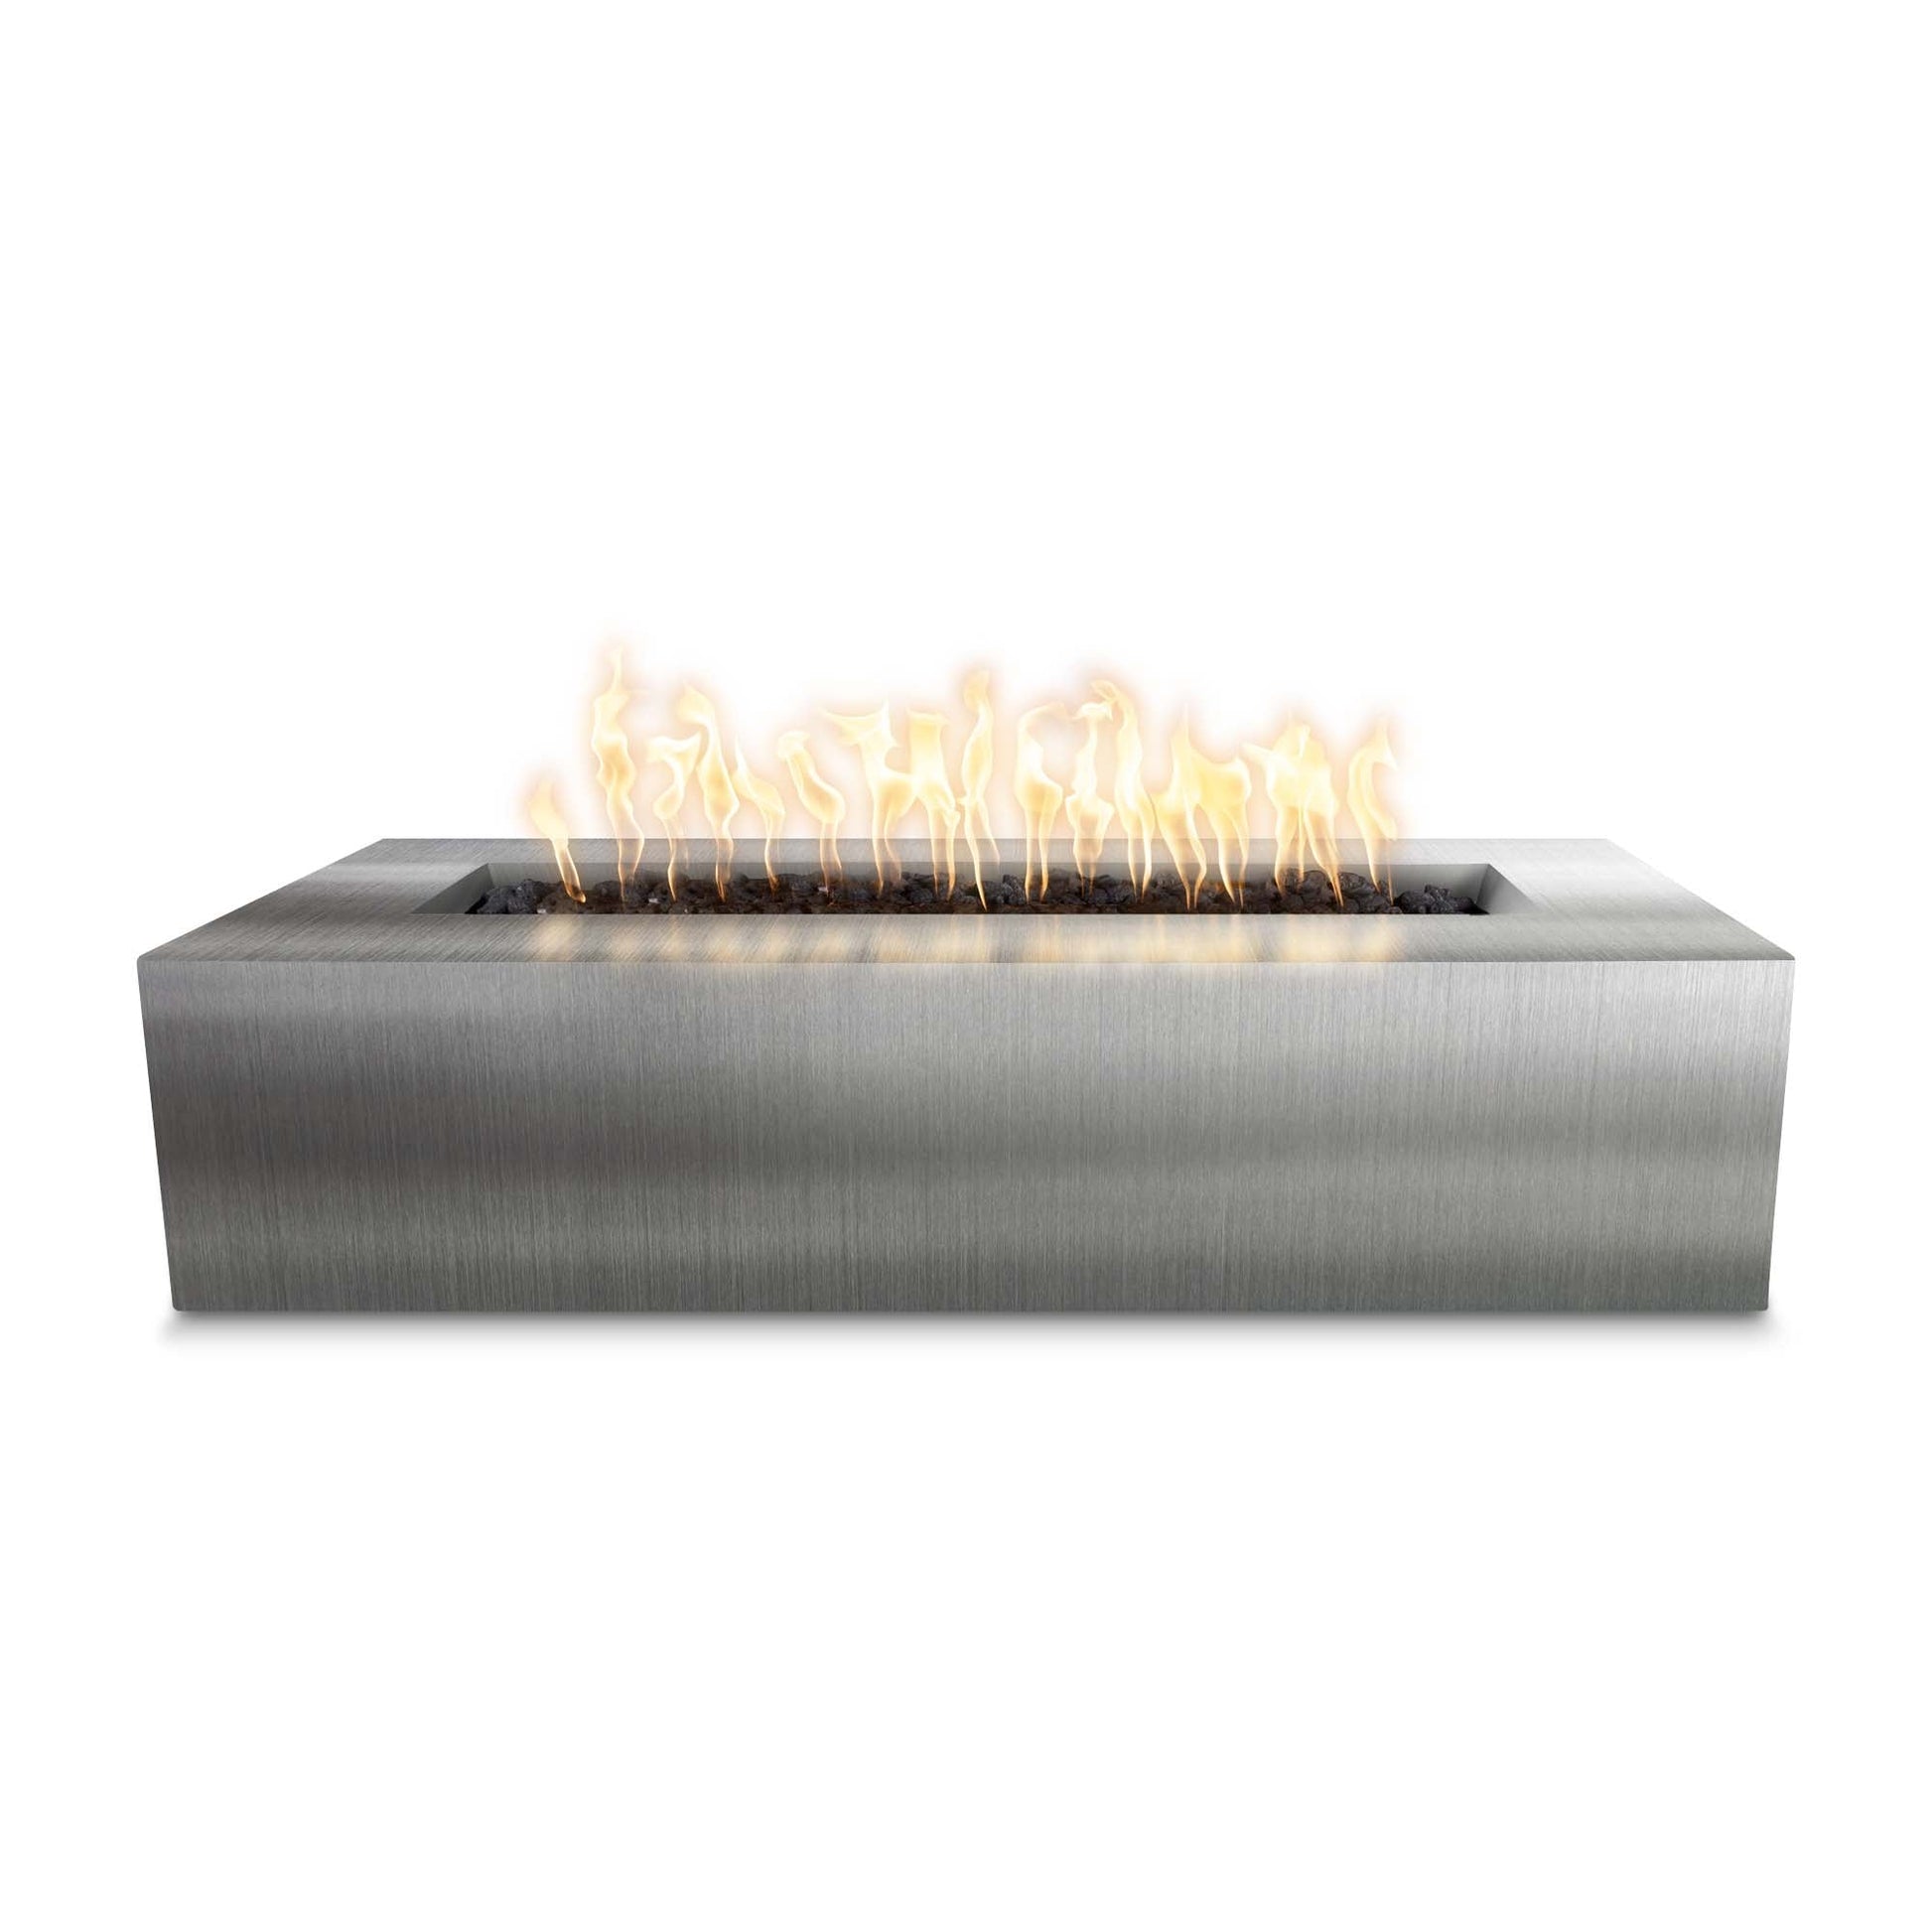 The Outdoor Plus Rectangular Regal 48" Corten Steel Natural Gas Fire Pit with Match Lit with Flame Sense Ignition